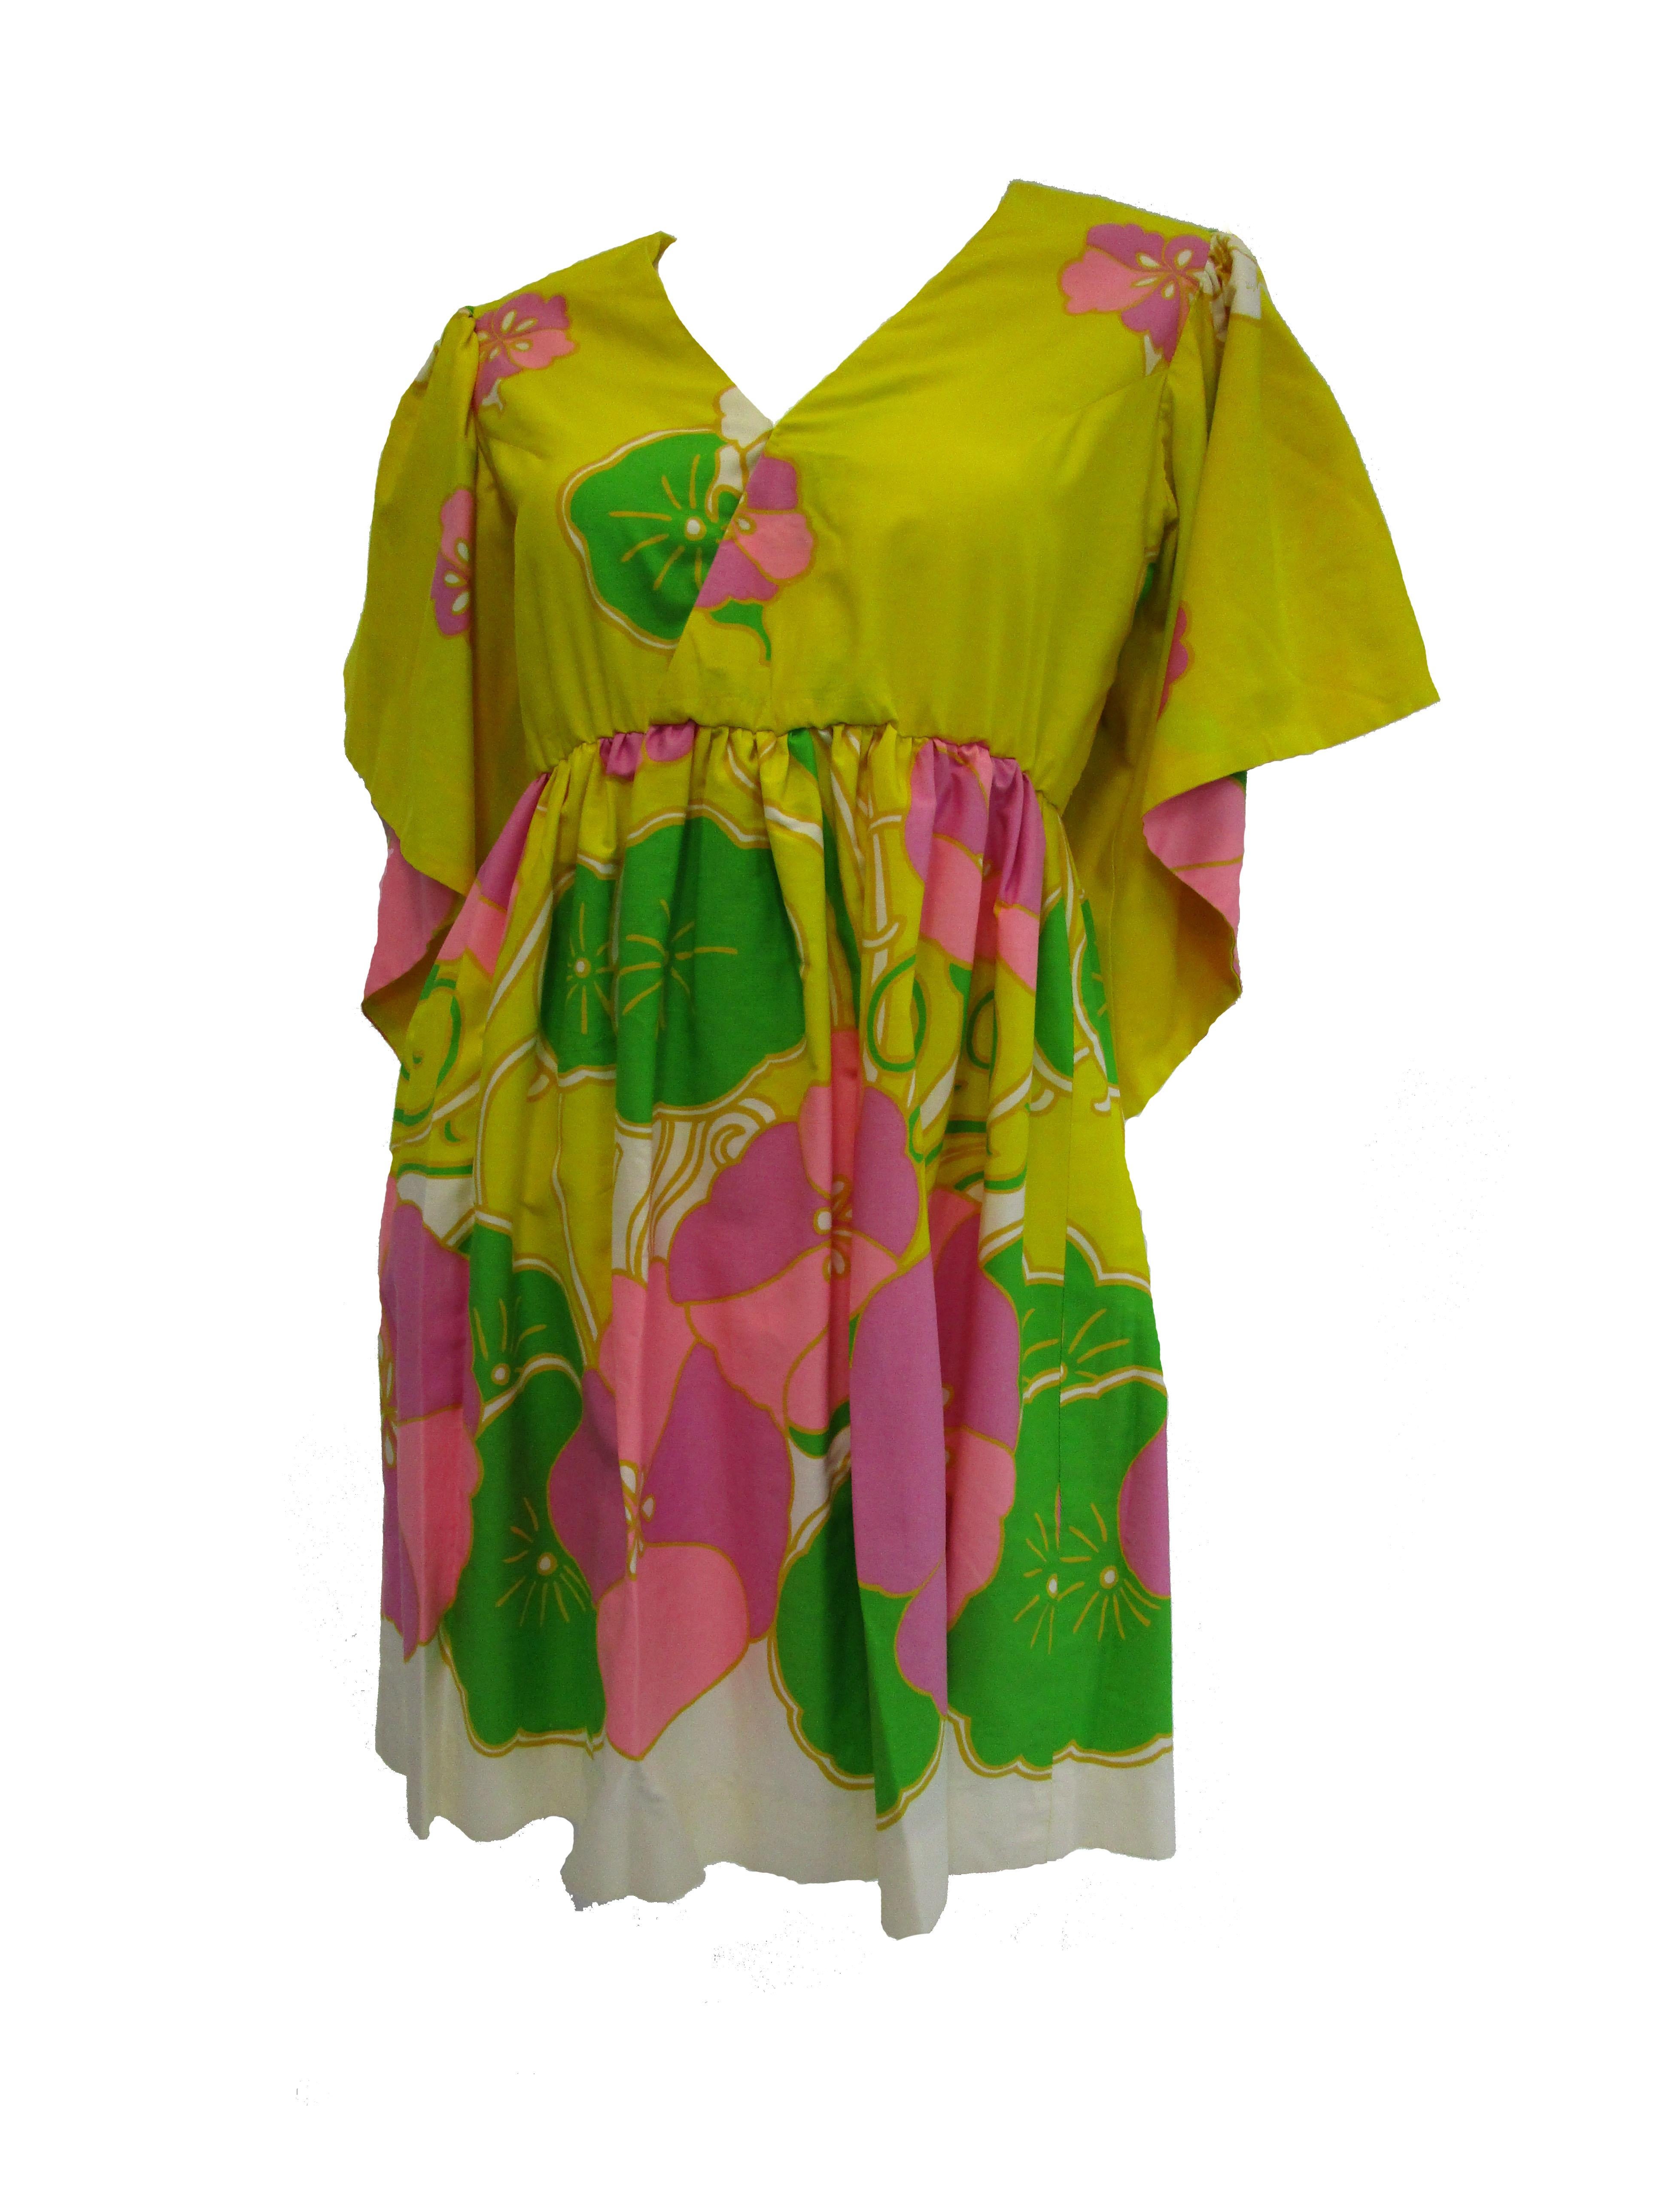 Resort wear season... here we come.....

Flirty, bright and vivid 60's dress by Mel Mortman. Waterfall sleeves add style to this dress. Featuring an empire waist and v-neck. Wear as a cover up at the pool or to the Saturday market with a straw hat.